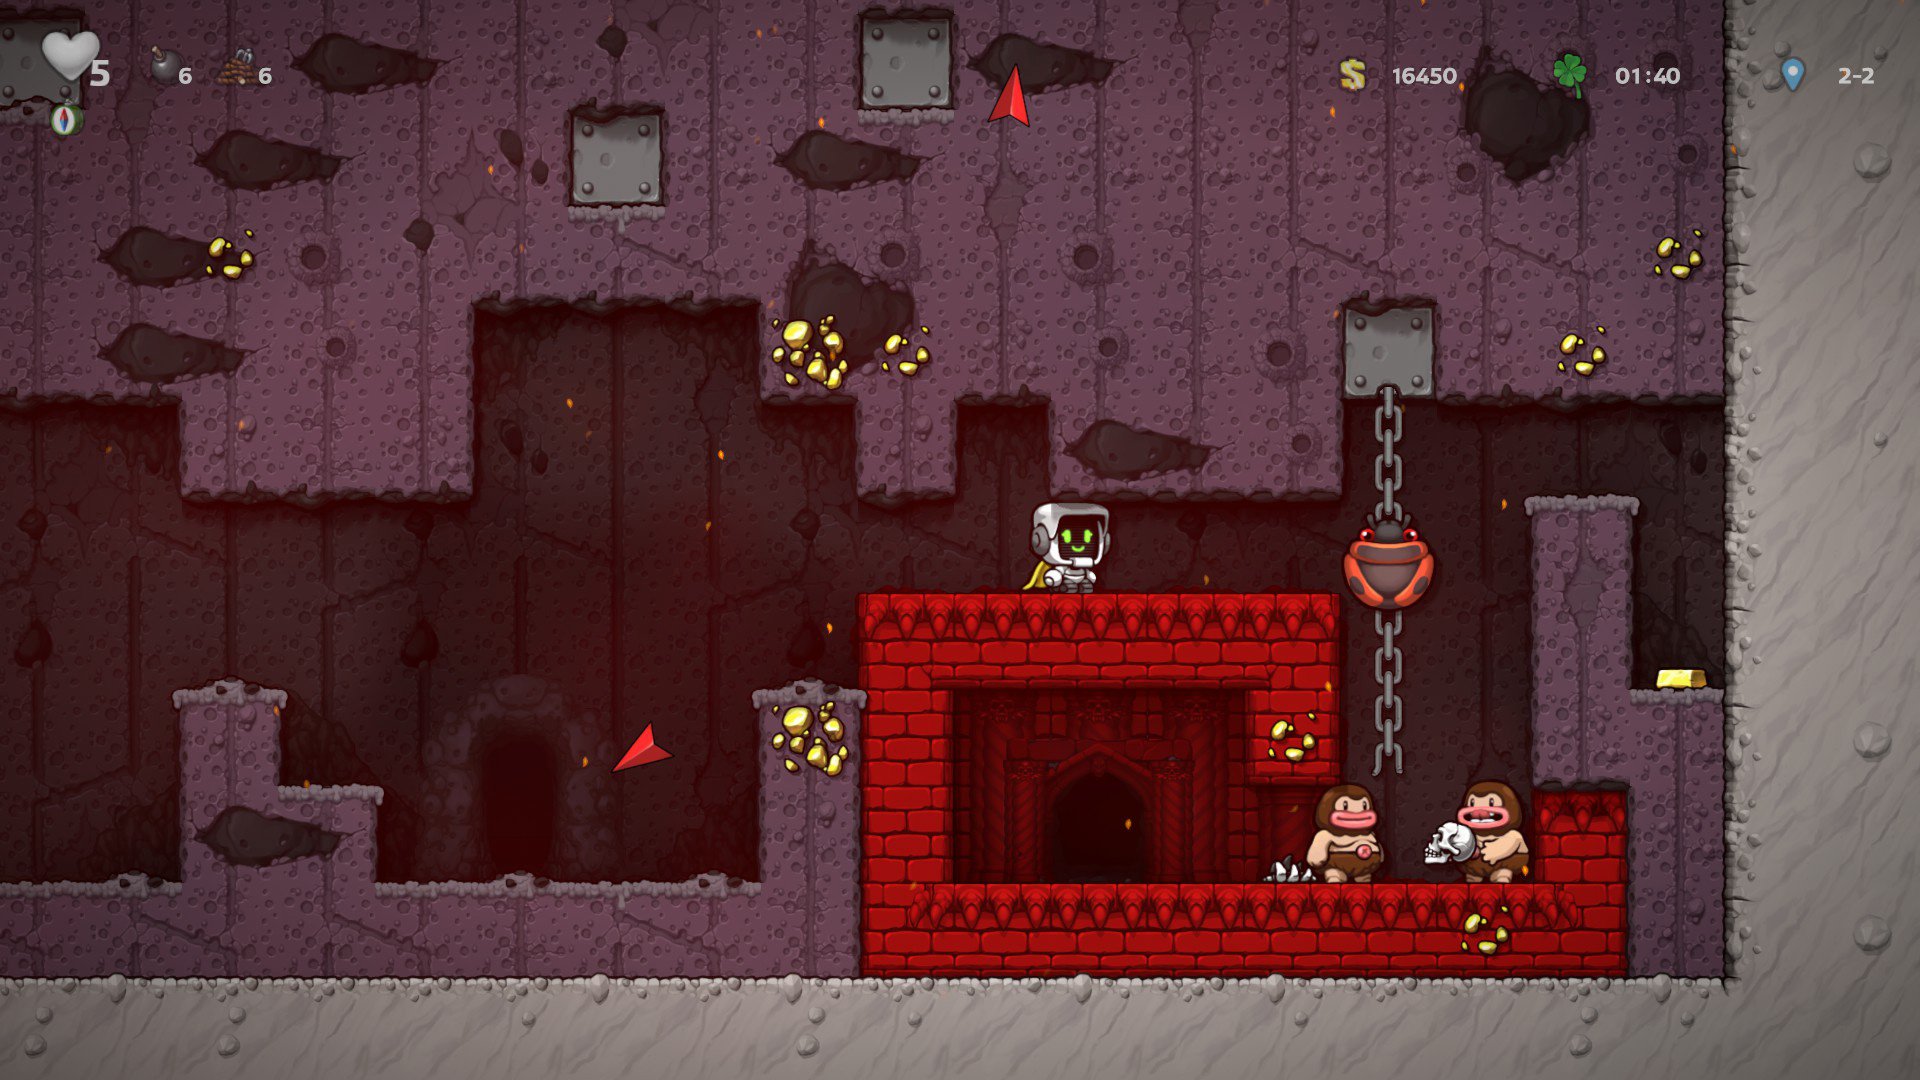 How to reach Vlad and get the crown in Spelunky 2